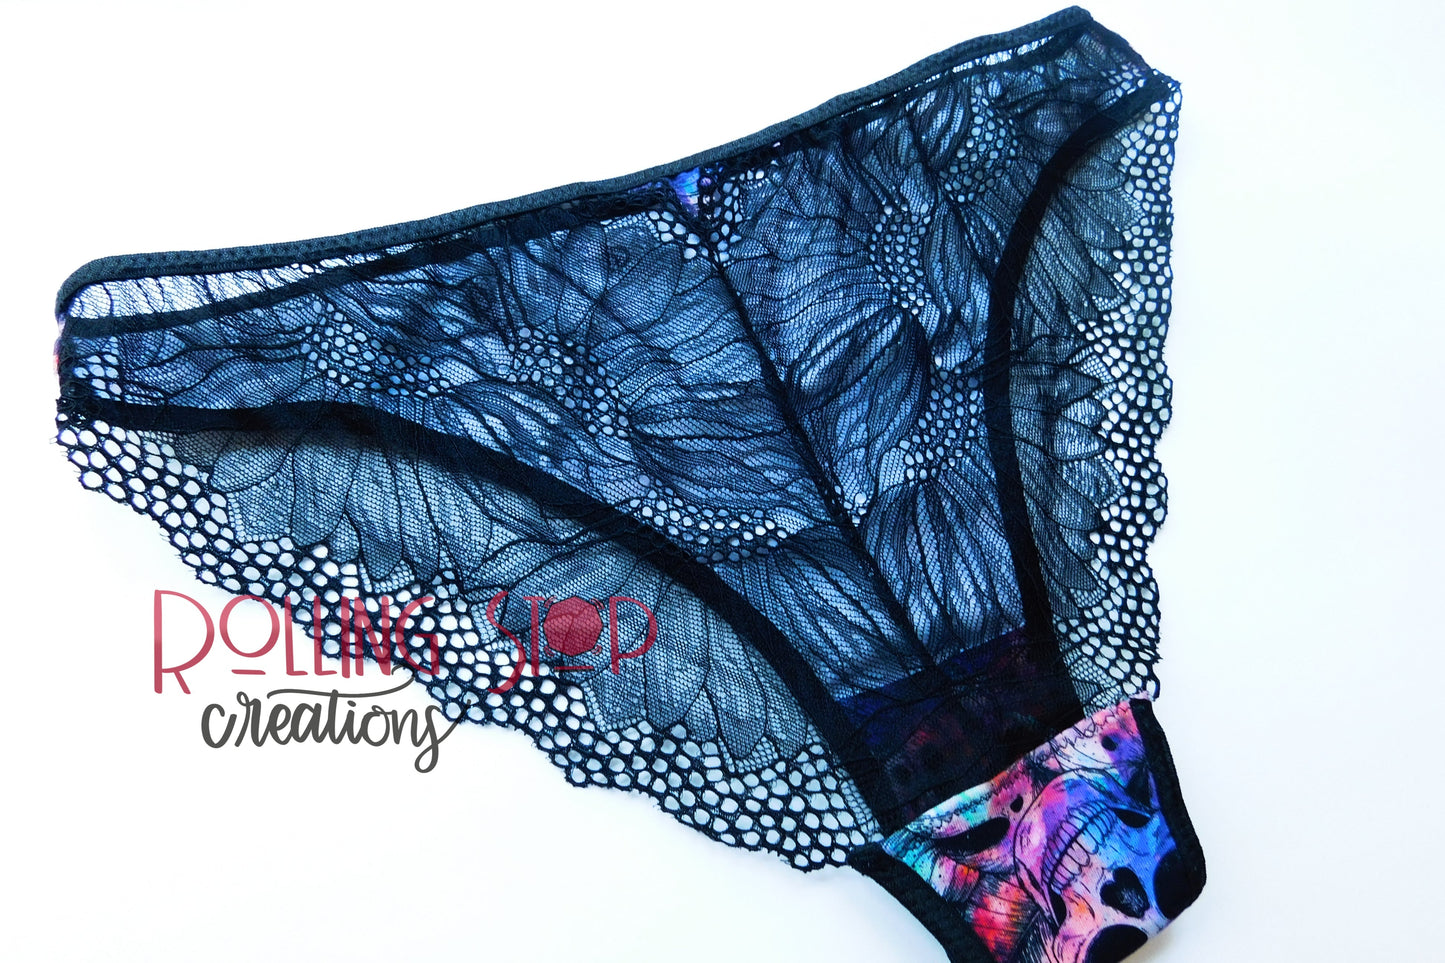 Royalty Skulls & Moths Lace Accent Pantydrawls by Rolling Stop Creations sold by Rolling Stop Creations Jundies - Lace